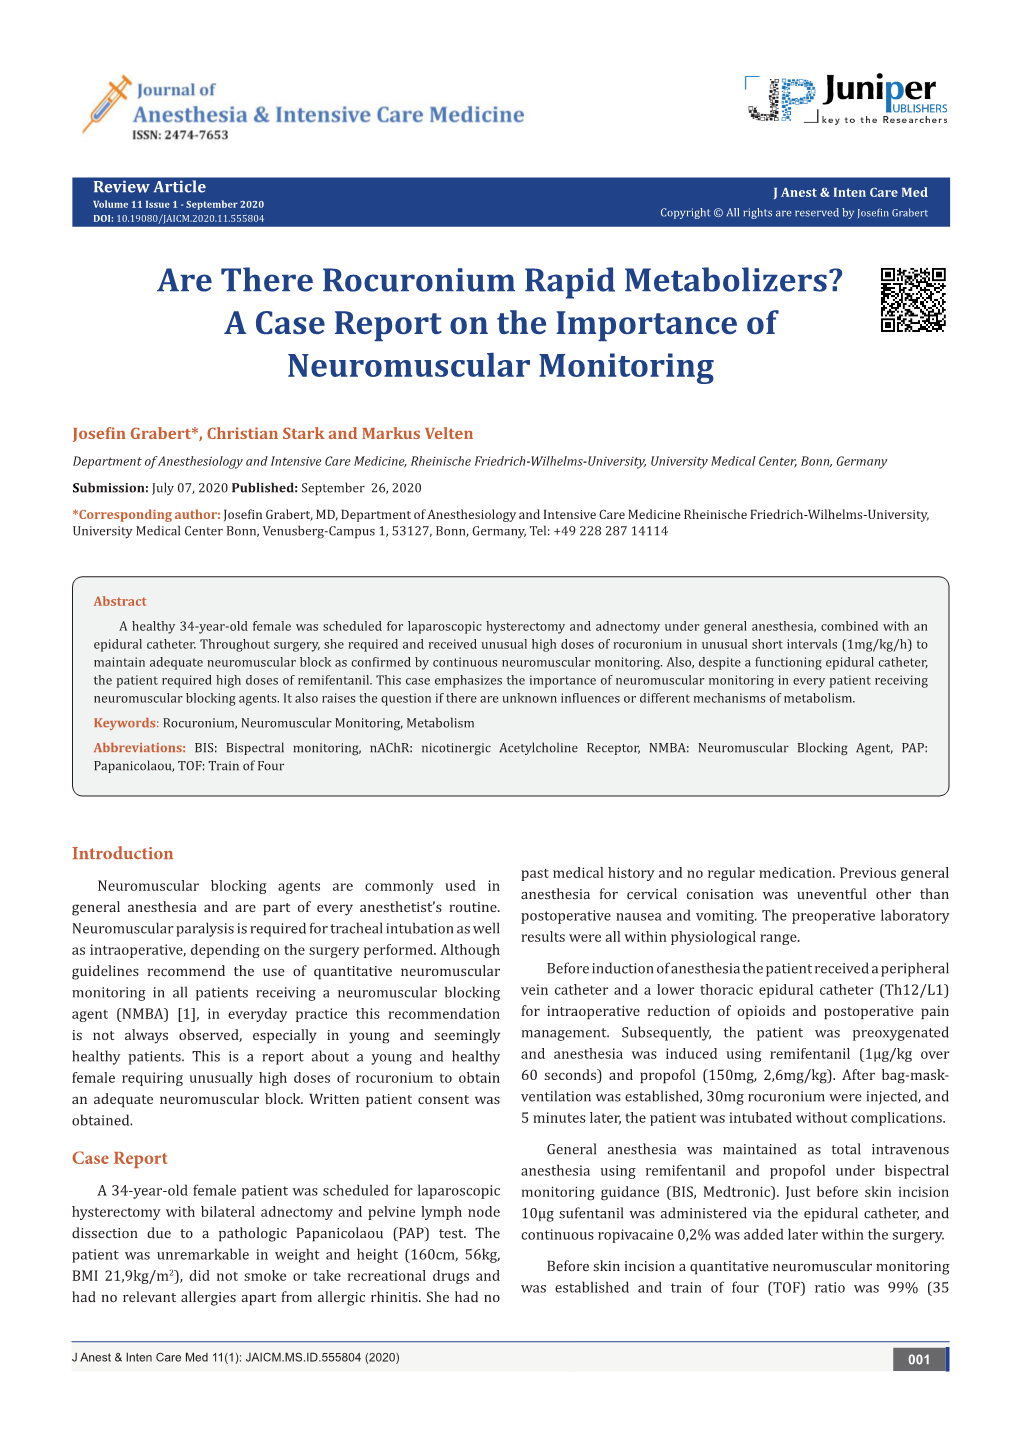 Are There Rocuronium Rapid Metabolizers? a Case Report on the Importance of Neuromuscular Monitoring